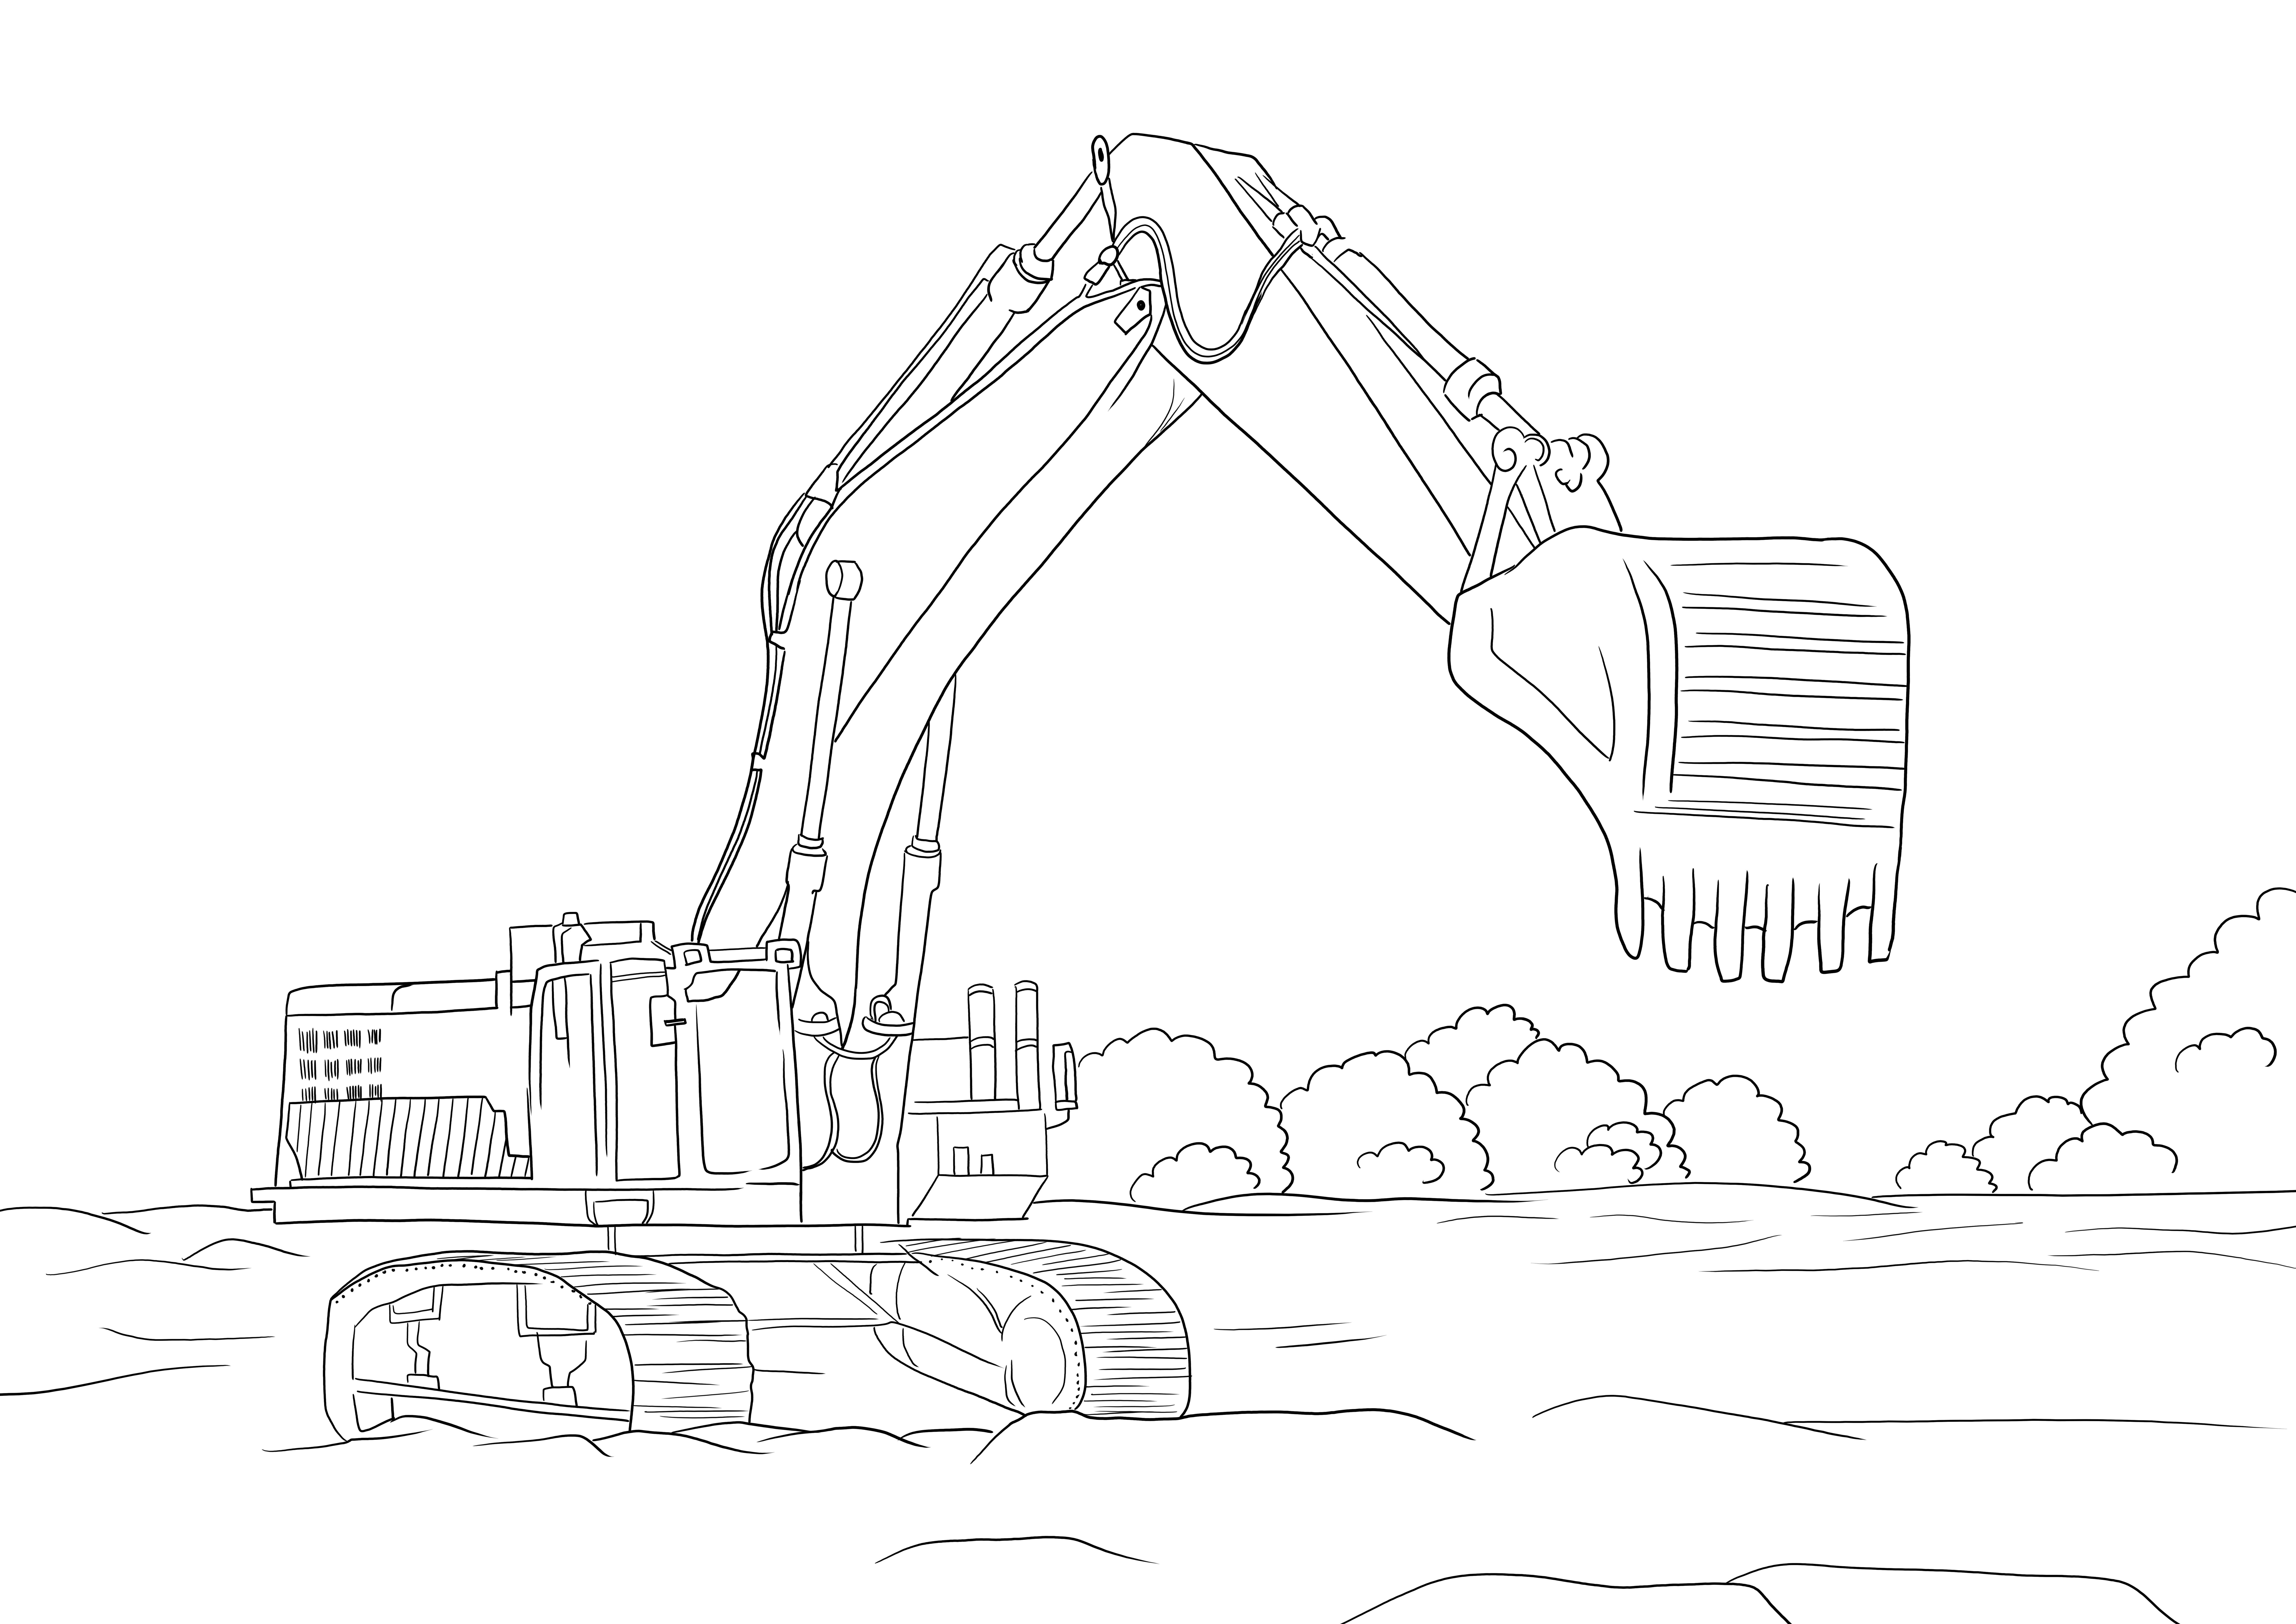 Caterpillar excavator ready to dig into the ground freebie to color